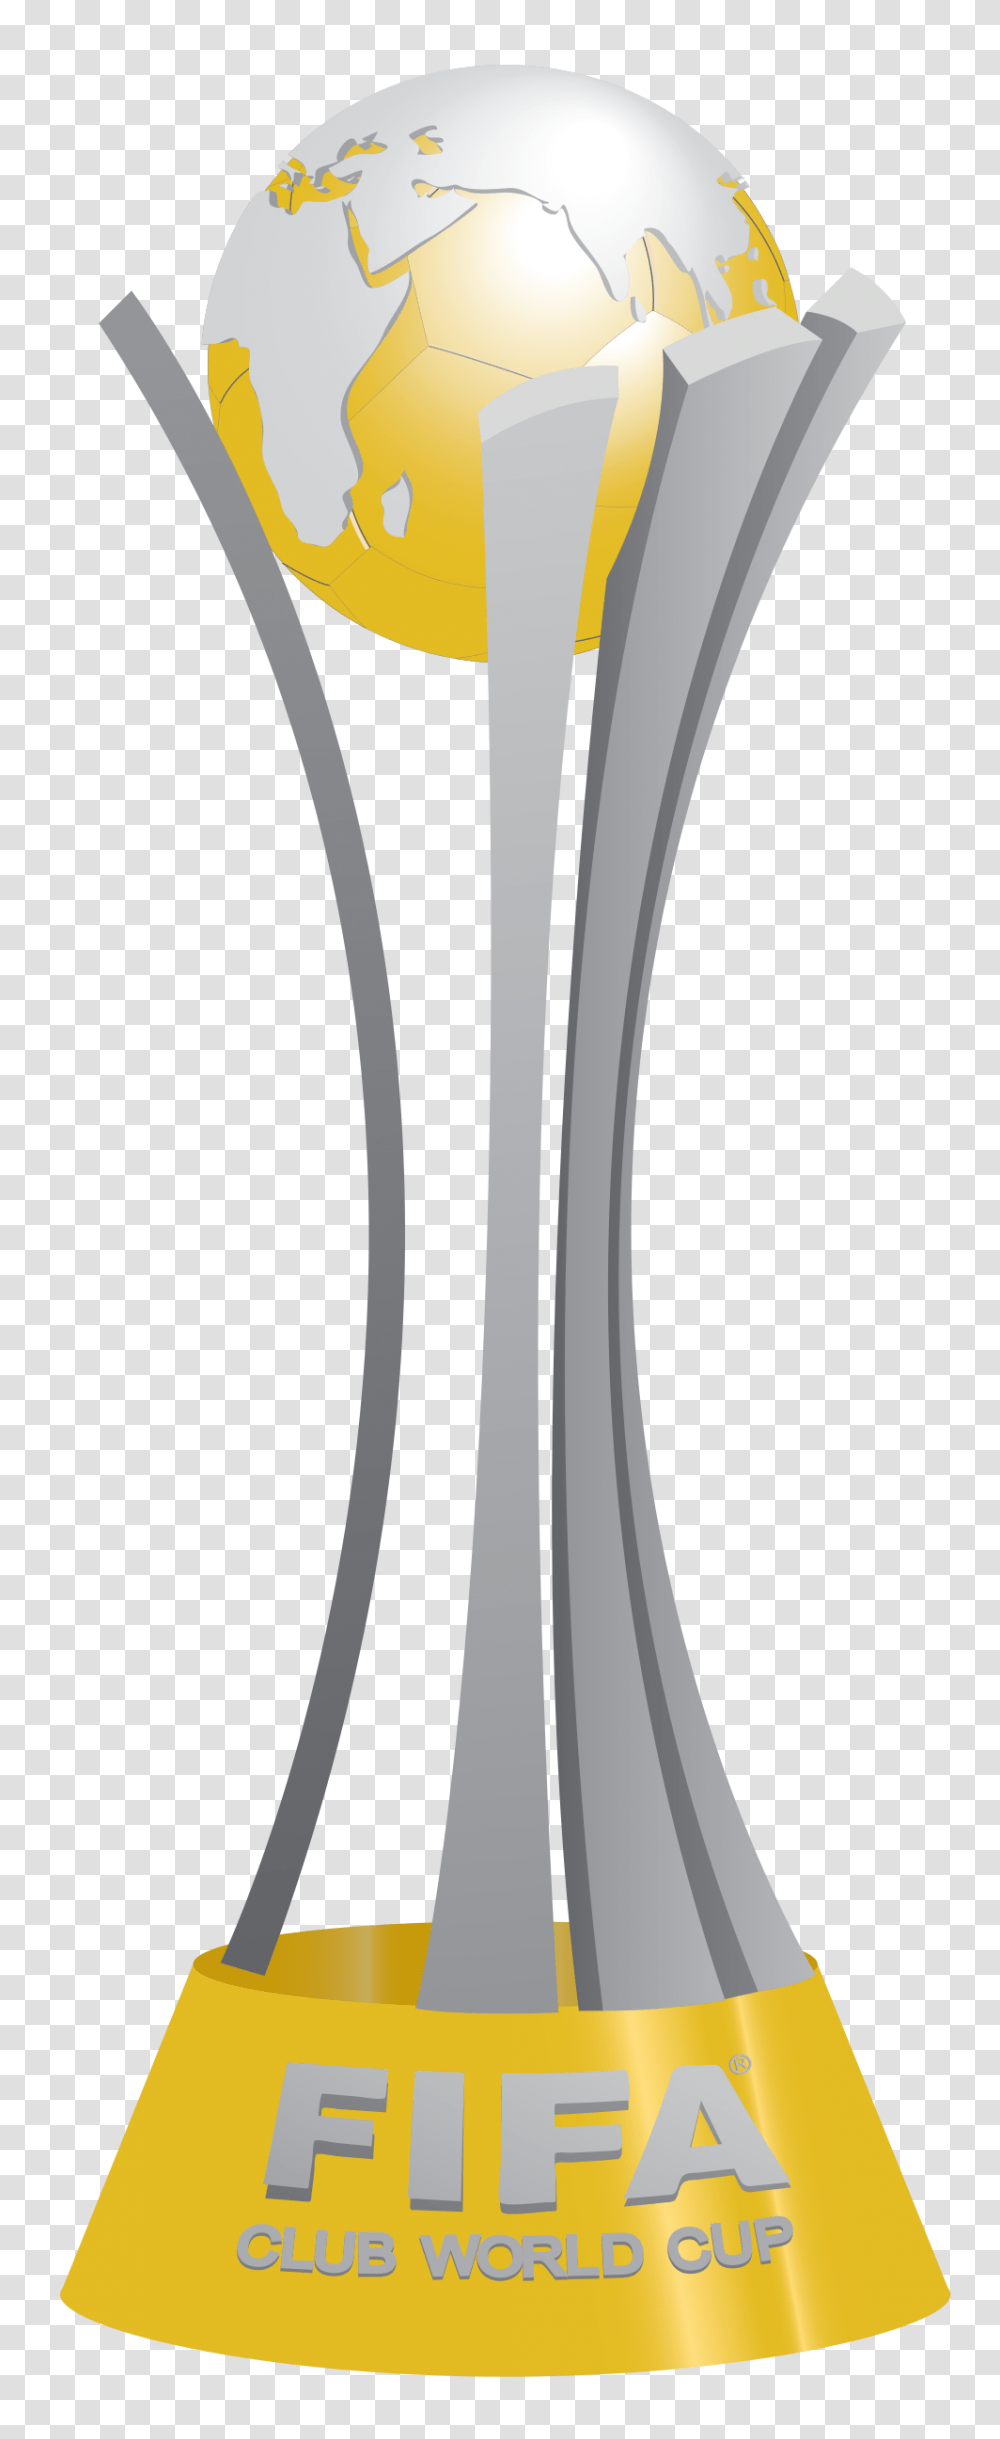 Fifa Club World Cup, Vase, Jar, Pottery, Glass Transparent Png